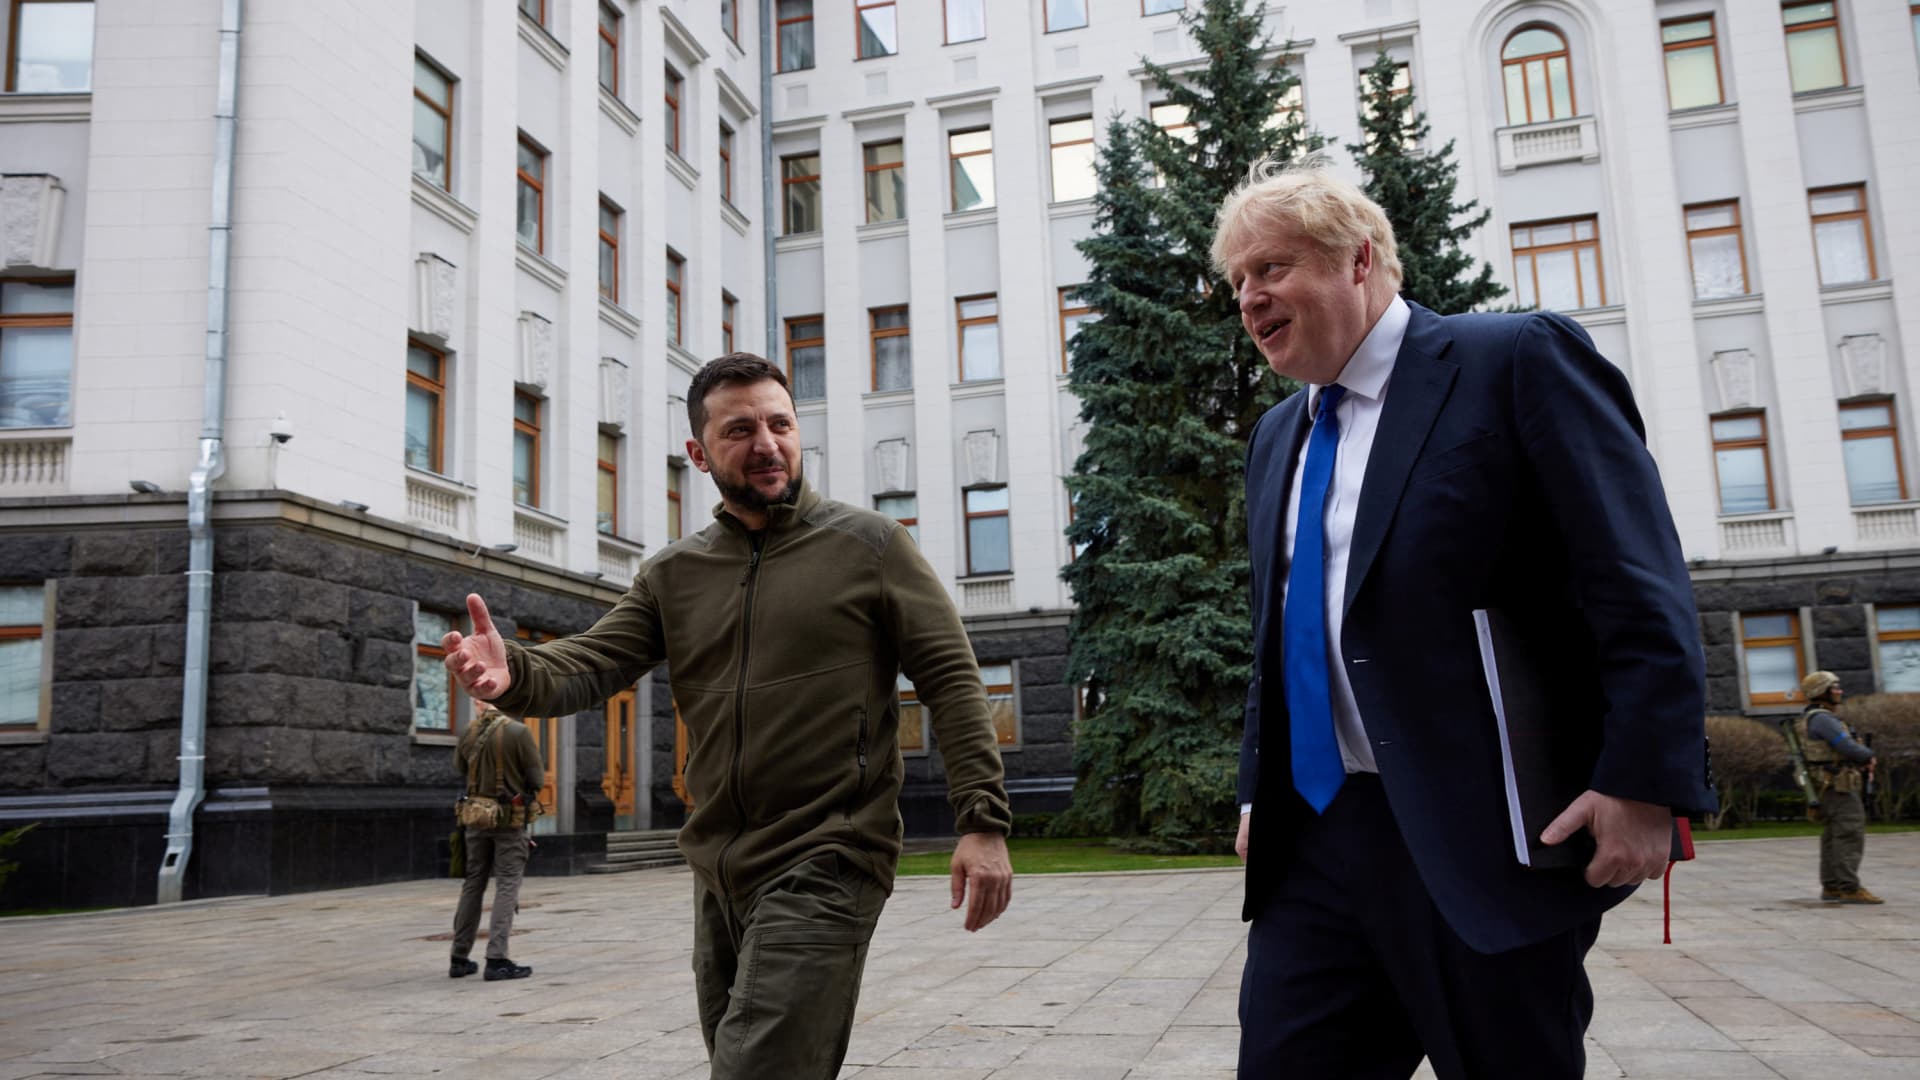 Ukraine's President Volodymyr Zelenskiy welcomes British Prime Minister Boris Johnson before a meeting, as Russia's attack on Ukraine continues, in Kyiv, Ukraine April 9, 2022. 